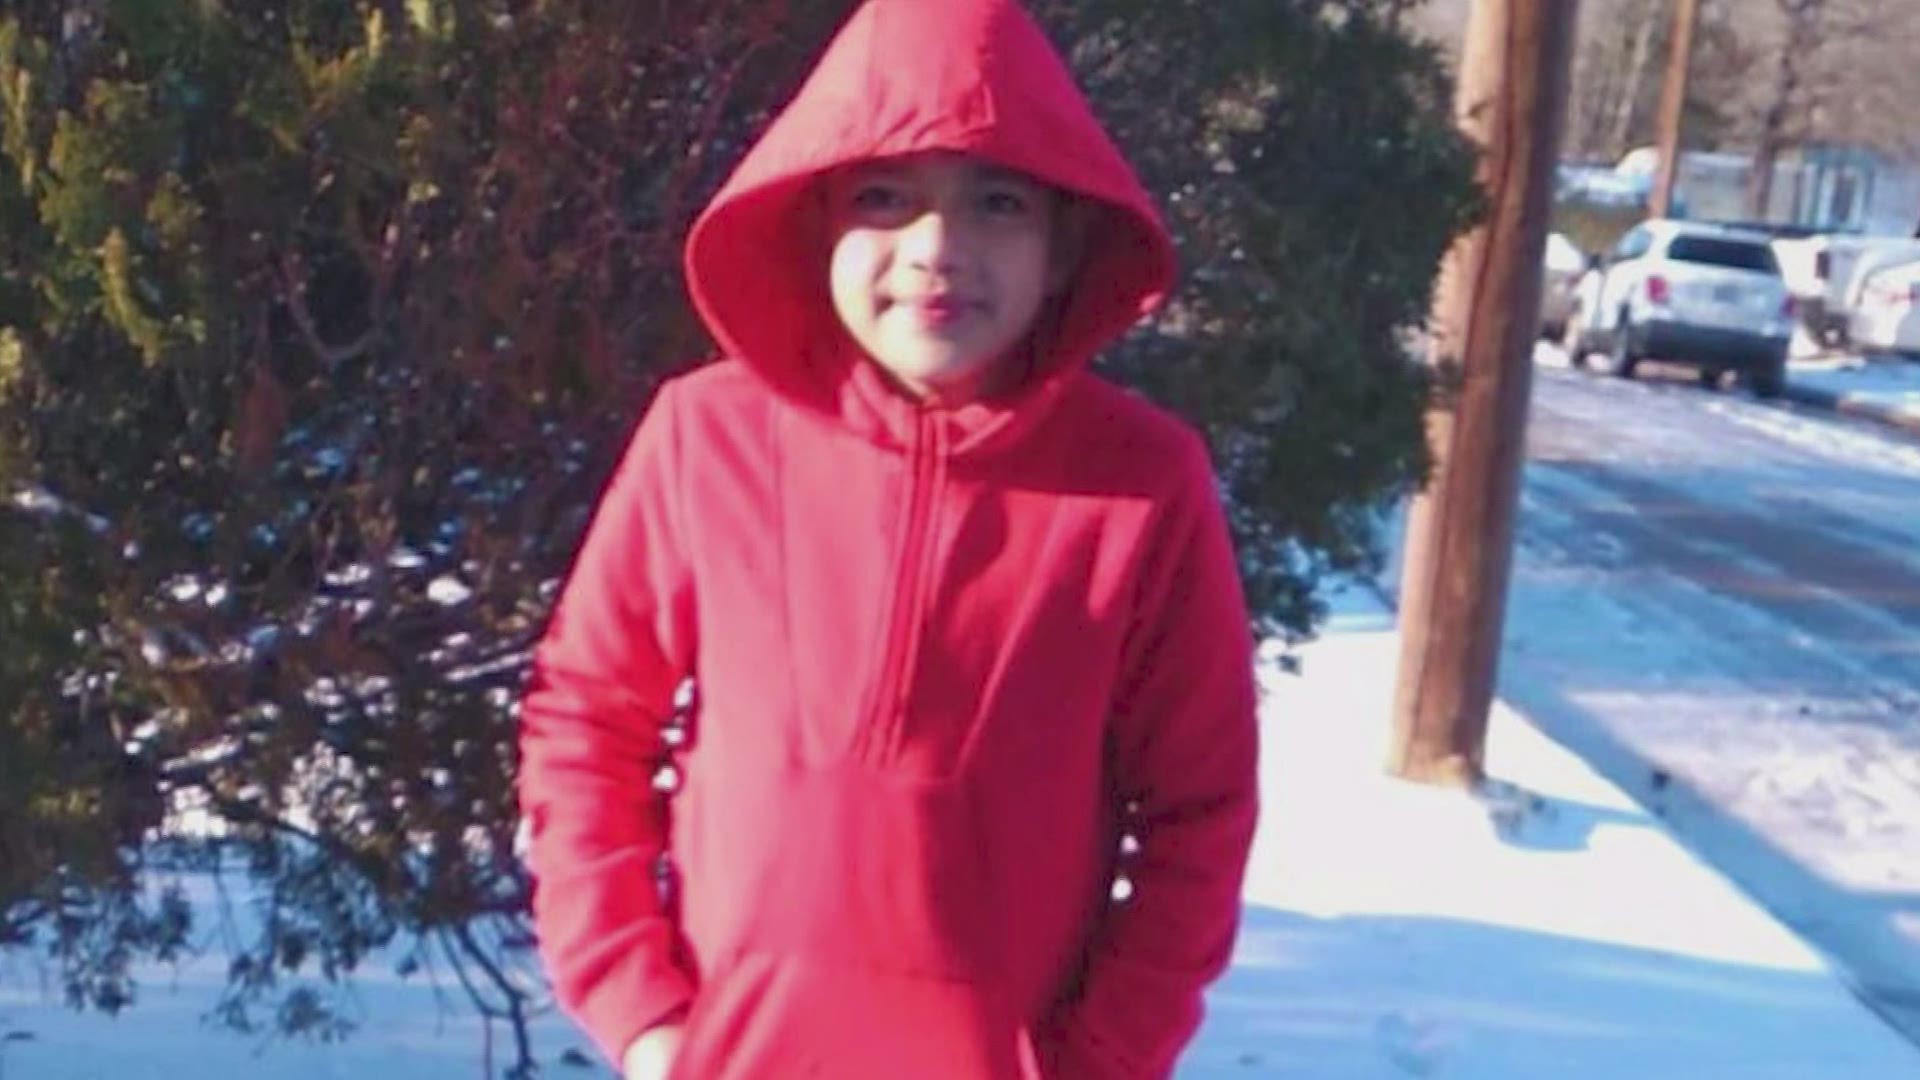 Christian Pavon was excited to play in the snow on Monday. But after a night of bitter cold temperatures, the boy's family found his lifeless body in his bed.